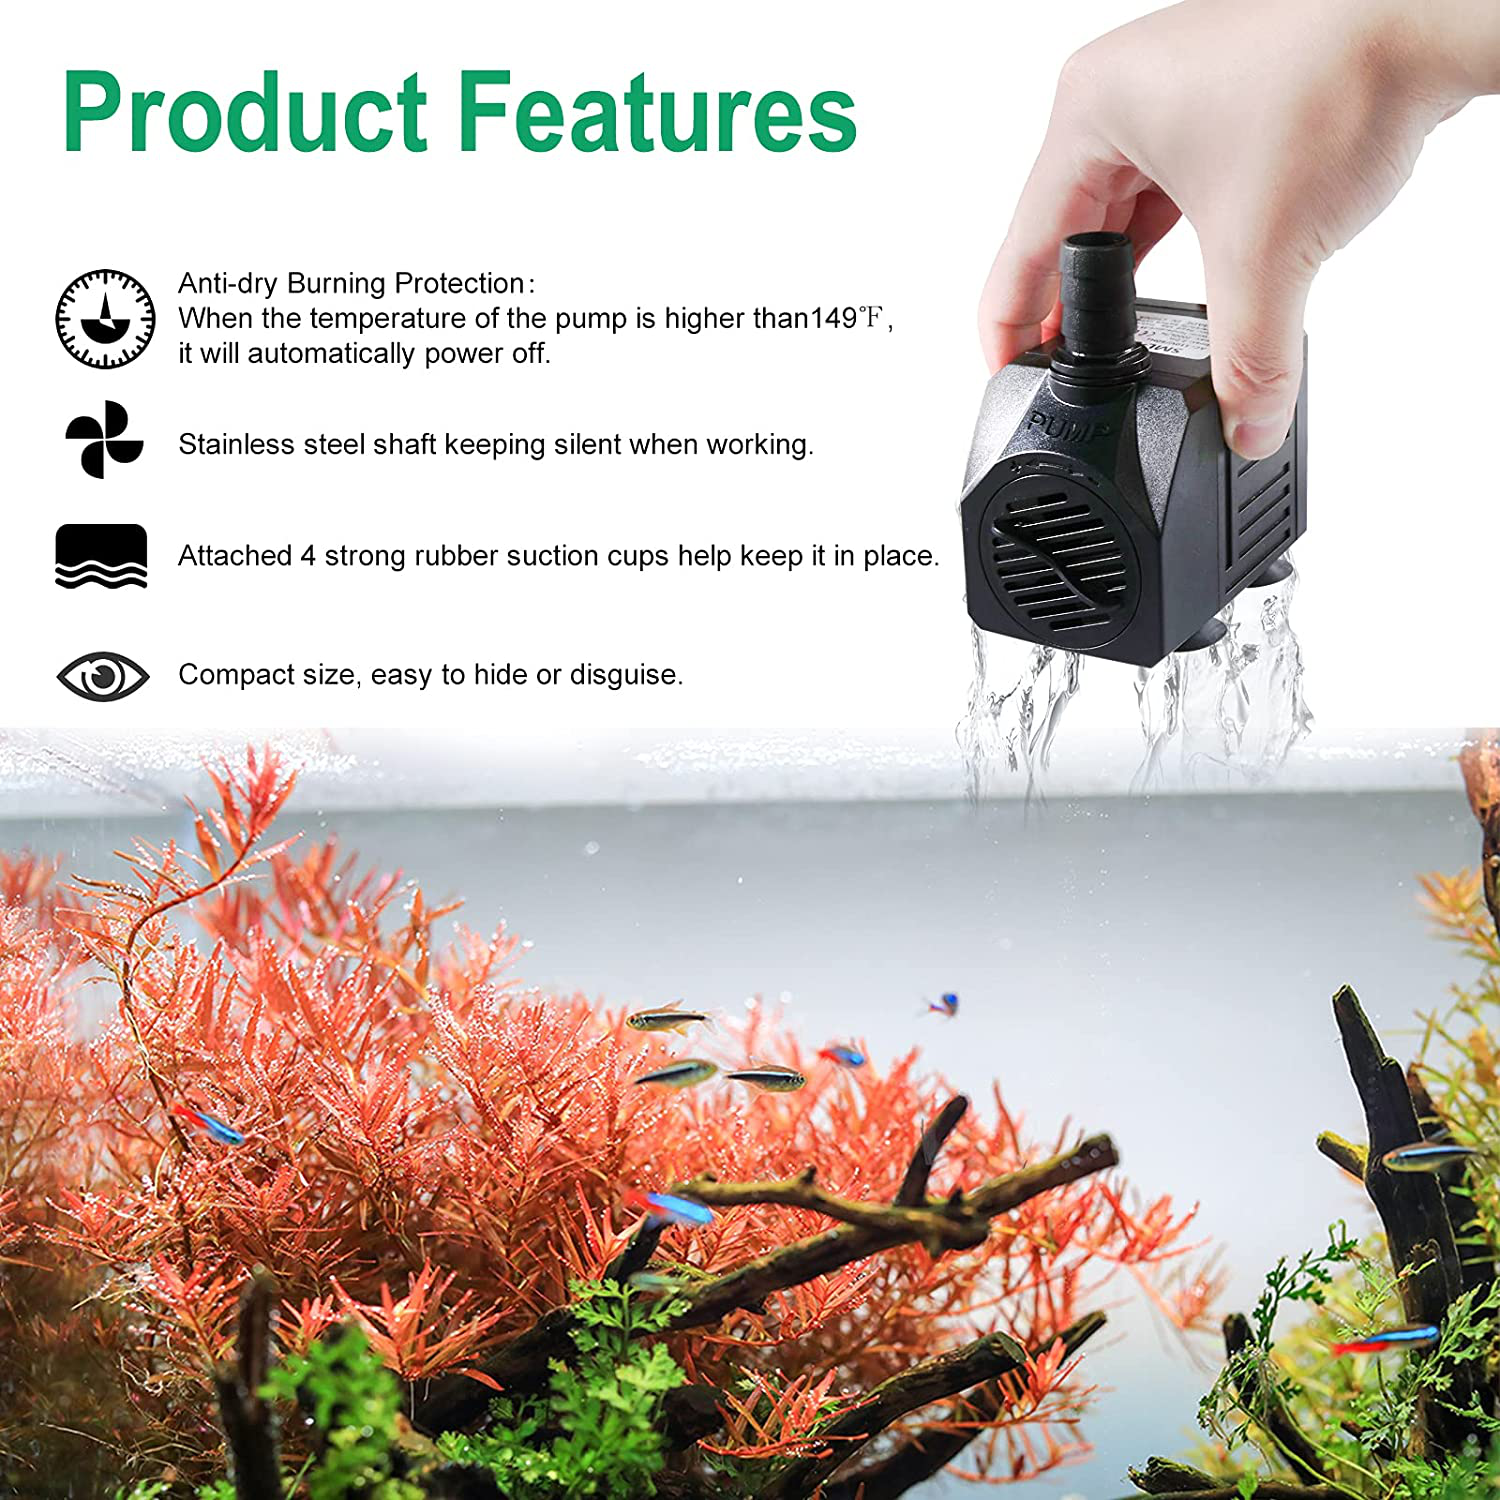 Asfrost Fountain Pump, 520GPH(30W 2000L/H) Submersible Water Pump, Outdoor Pond Pump with 6.5Ft Tubing (1/2" ID), 7.2Ft High Lift, 3 Nozzles for Aquarium, Small Waterfall, Fish Tank, Hydroponics Animals & Pet Supplies > Pet Supplies > Fish Supplies > Aquarium & Pond Tubing AsFrost   